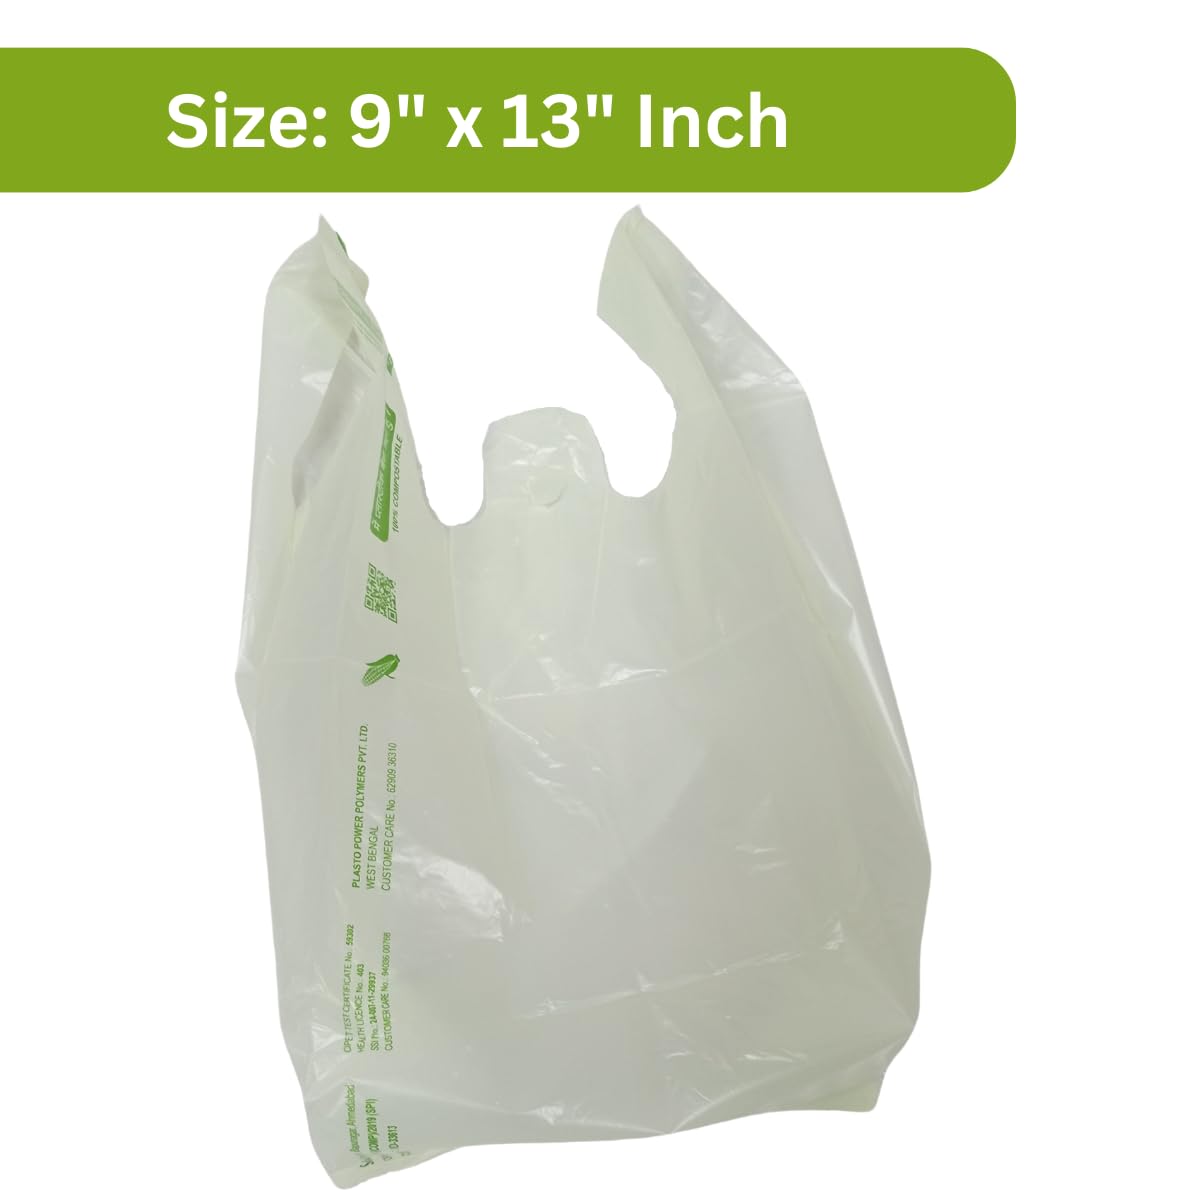 SINGHAL Biodegradable Carry Bags | Certified Compostable Carry Bag | Eco Friendly Shopping Bags for Home, Grocery Store Bag - Pack of 200 Bags 9x13 Inches